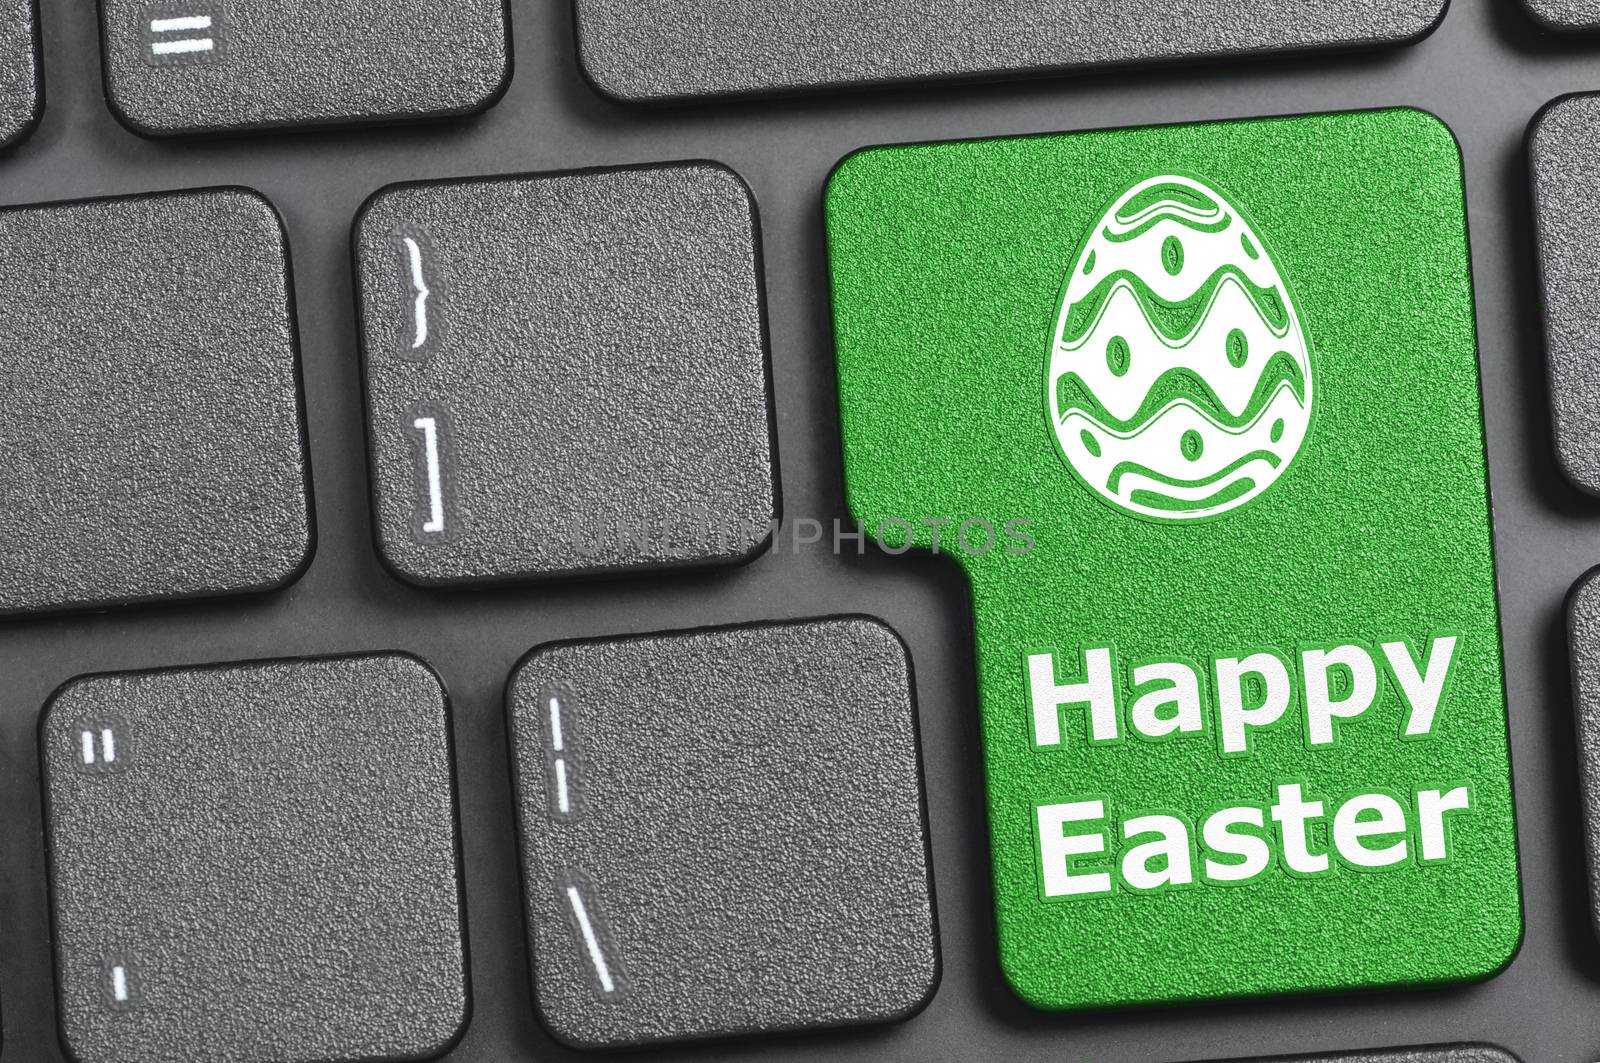 Happy easter key on keyboard by payphoto